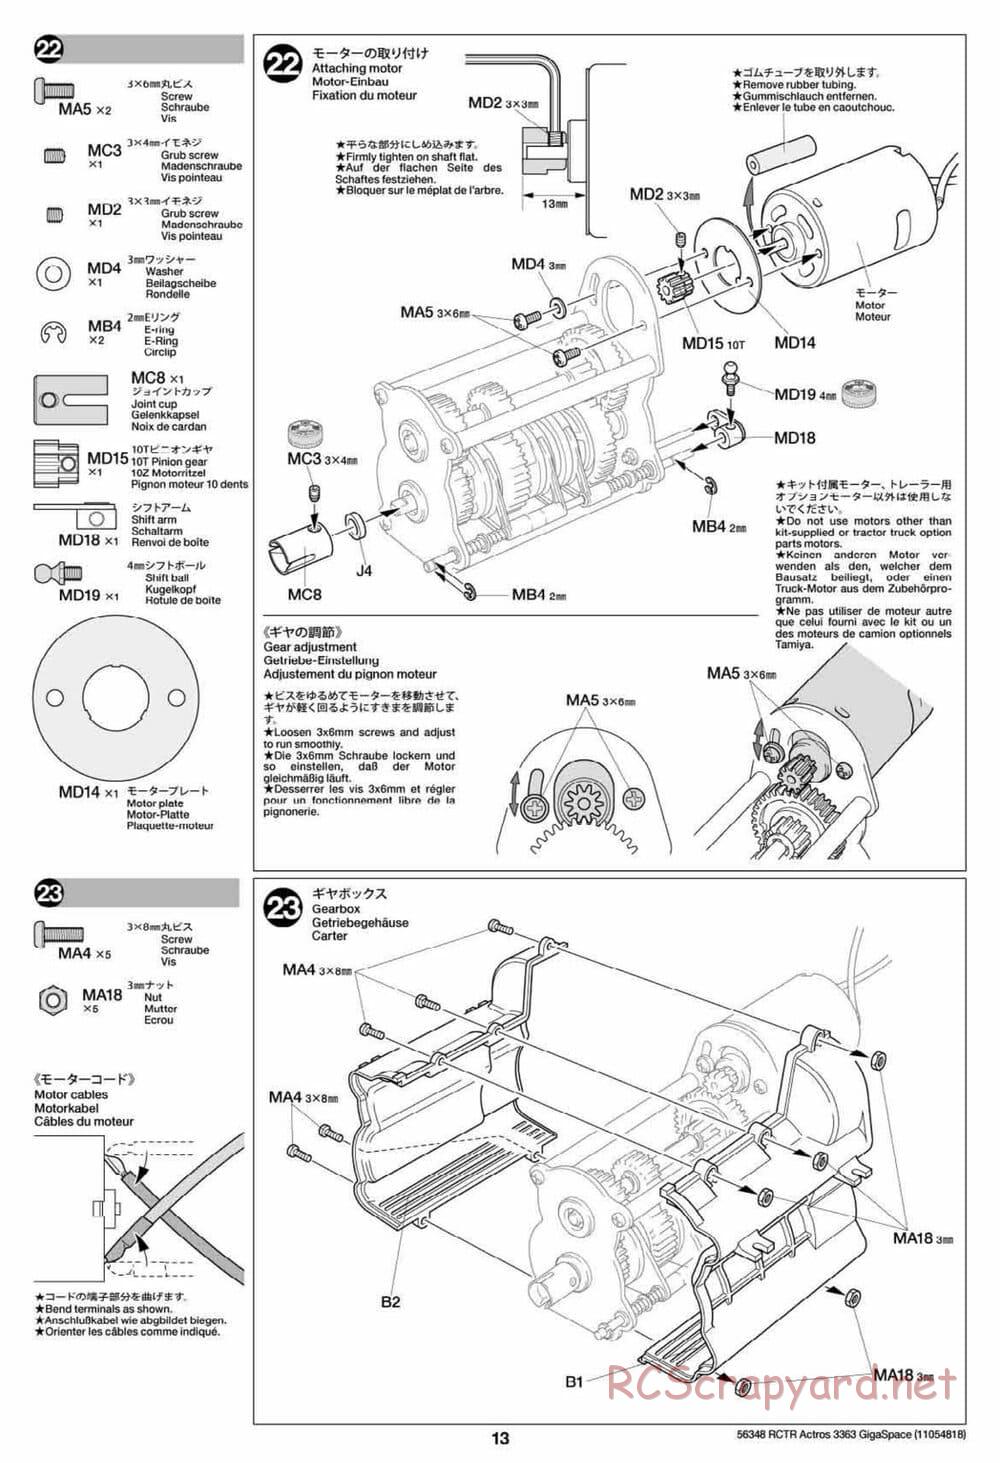 Tamiya - Mercedes-Benz Actros 3363 6x4 GigaSpace Tractor Truck Chassis - Manual - Page 13